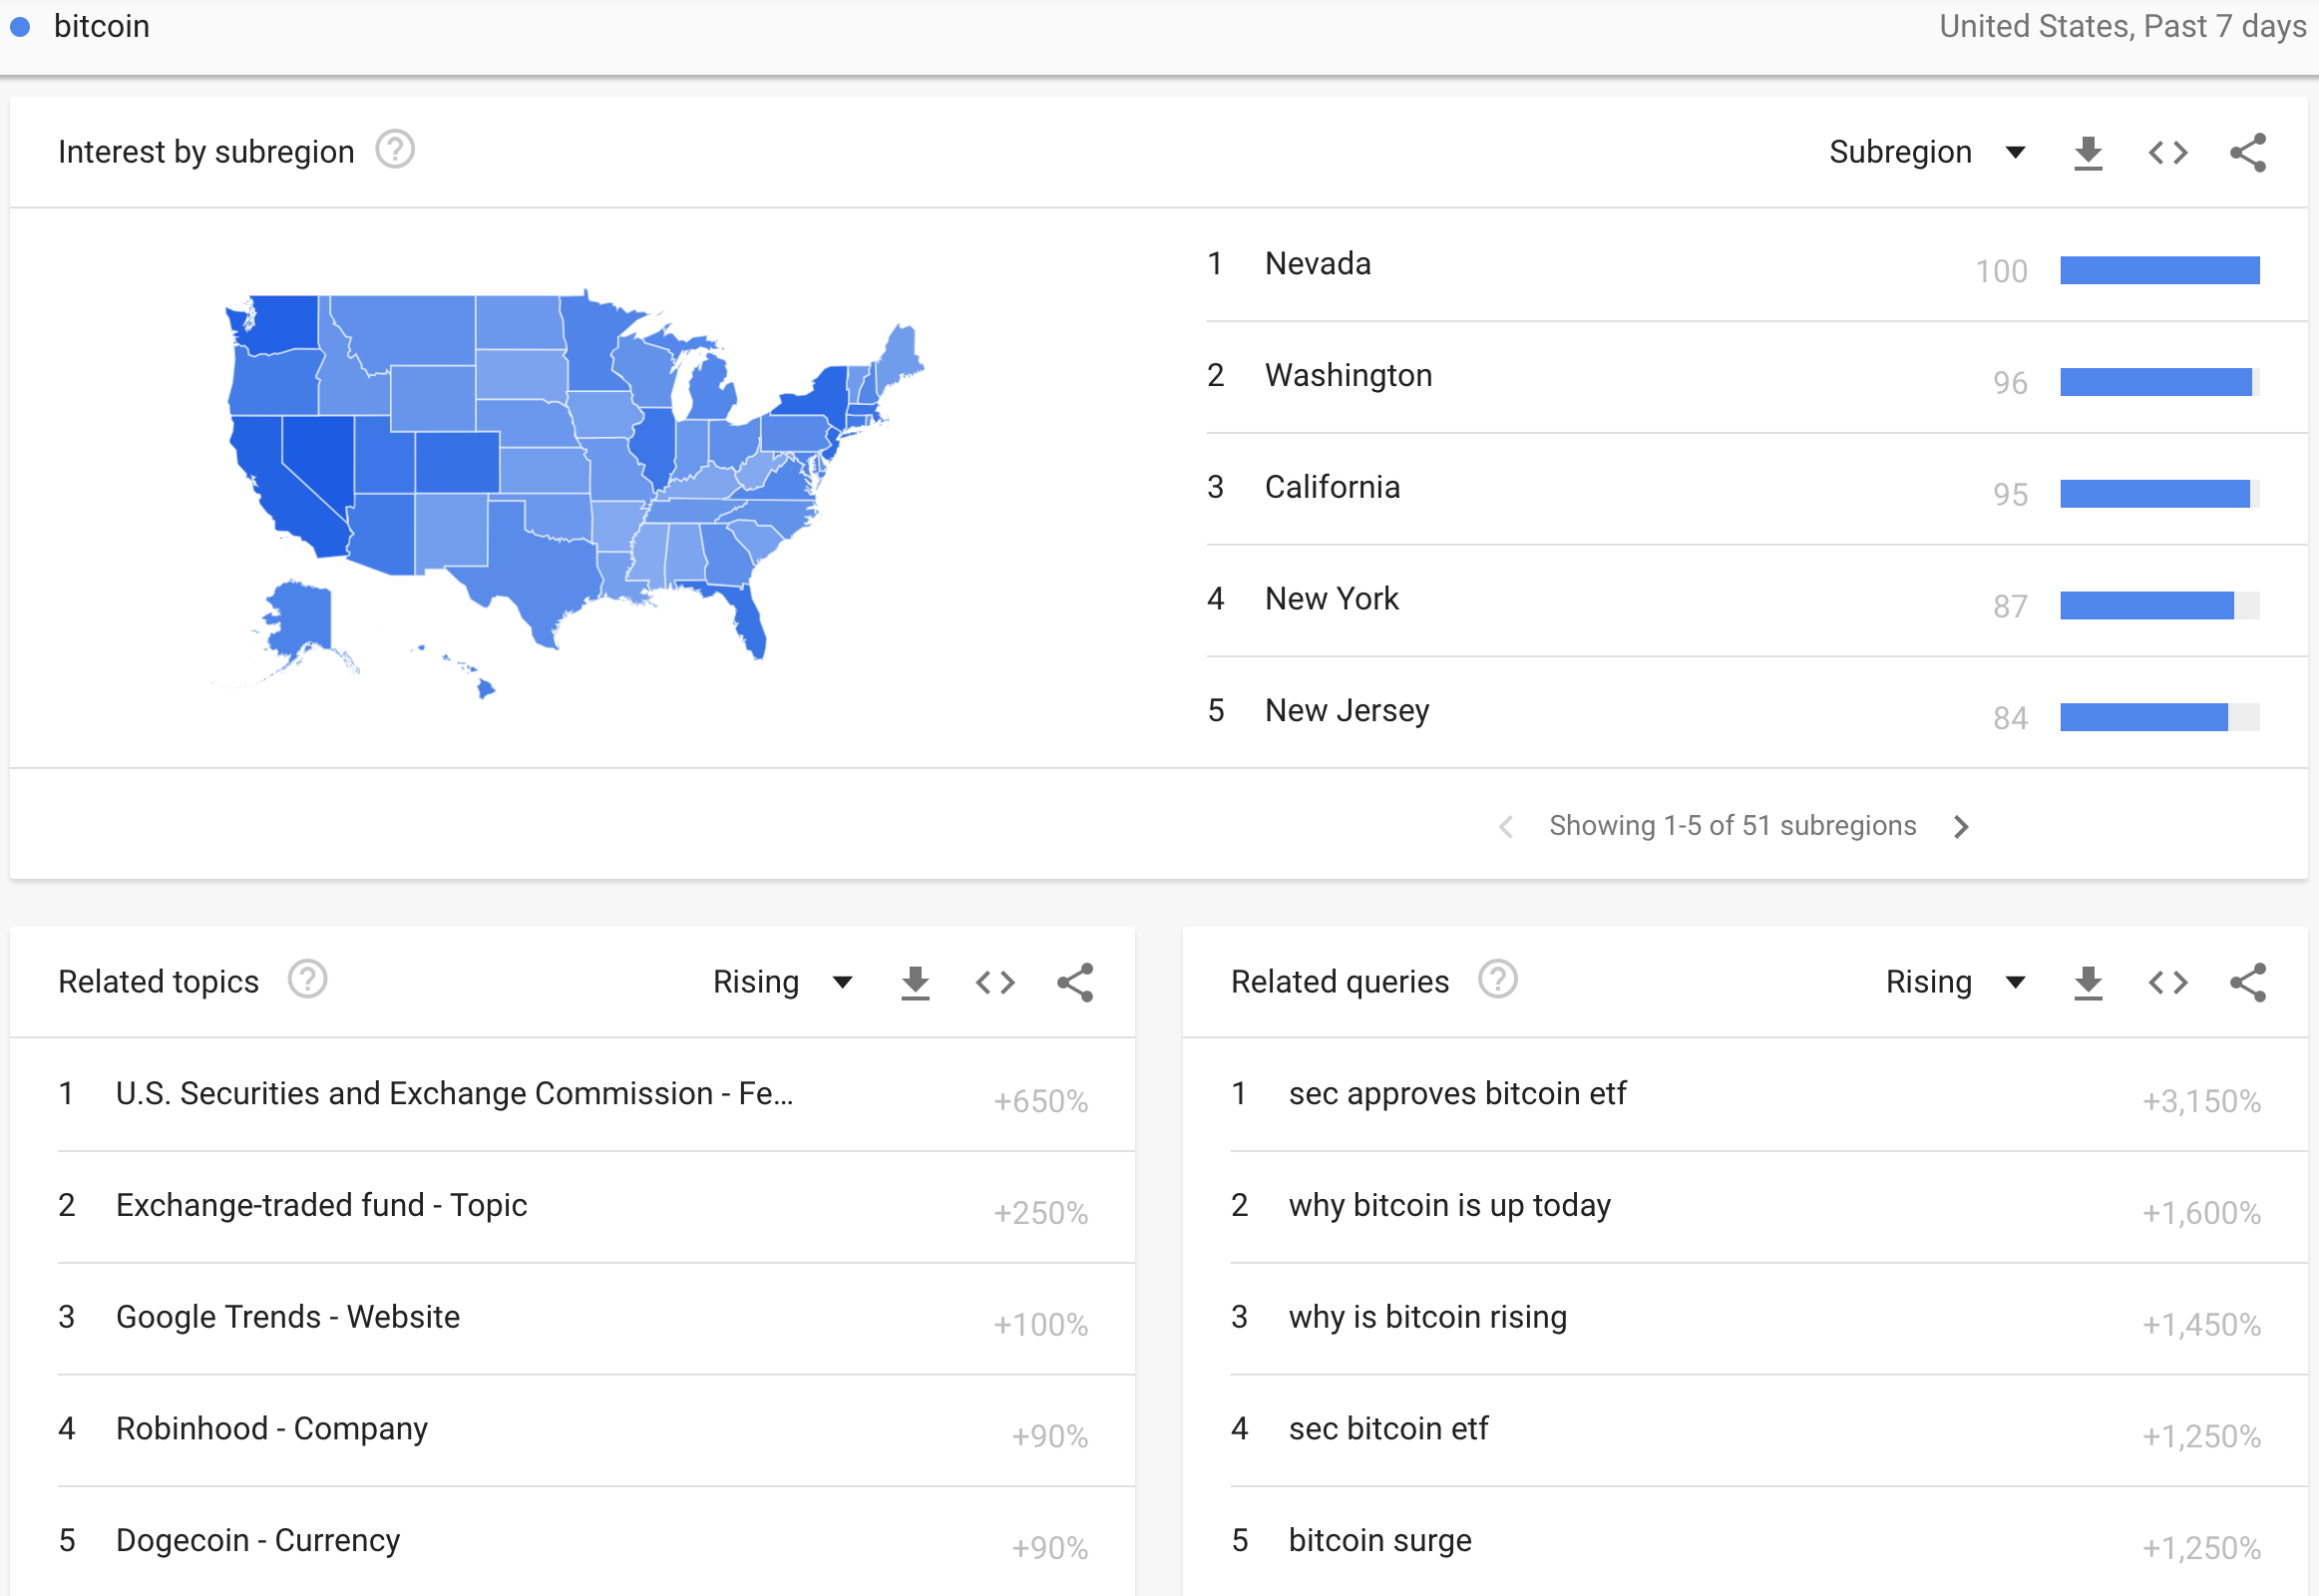 Over the last 7 days, population centers in the U.S. have shown a spike in "Bitcoin" search interest. Related topics and related queries help confirm that the Bitcoin searches are relevant to the cryptocurrency.